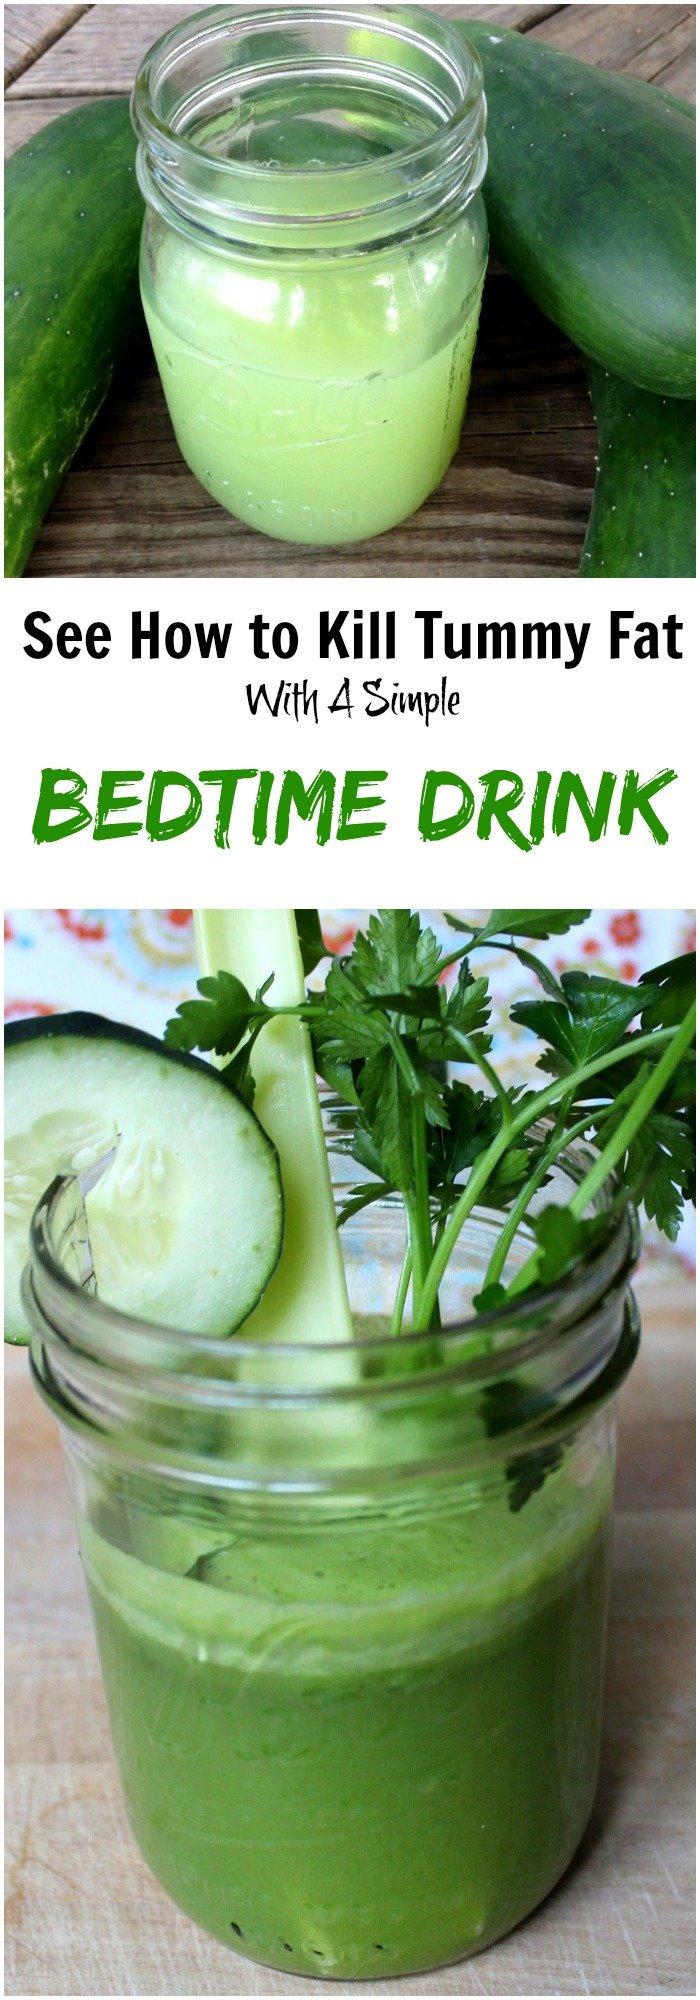 See How to Kill Tummy Fat With A Simple Bedtime Drink